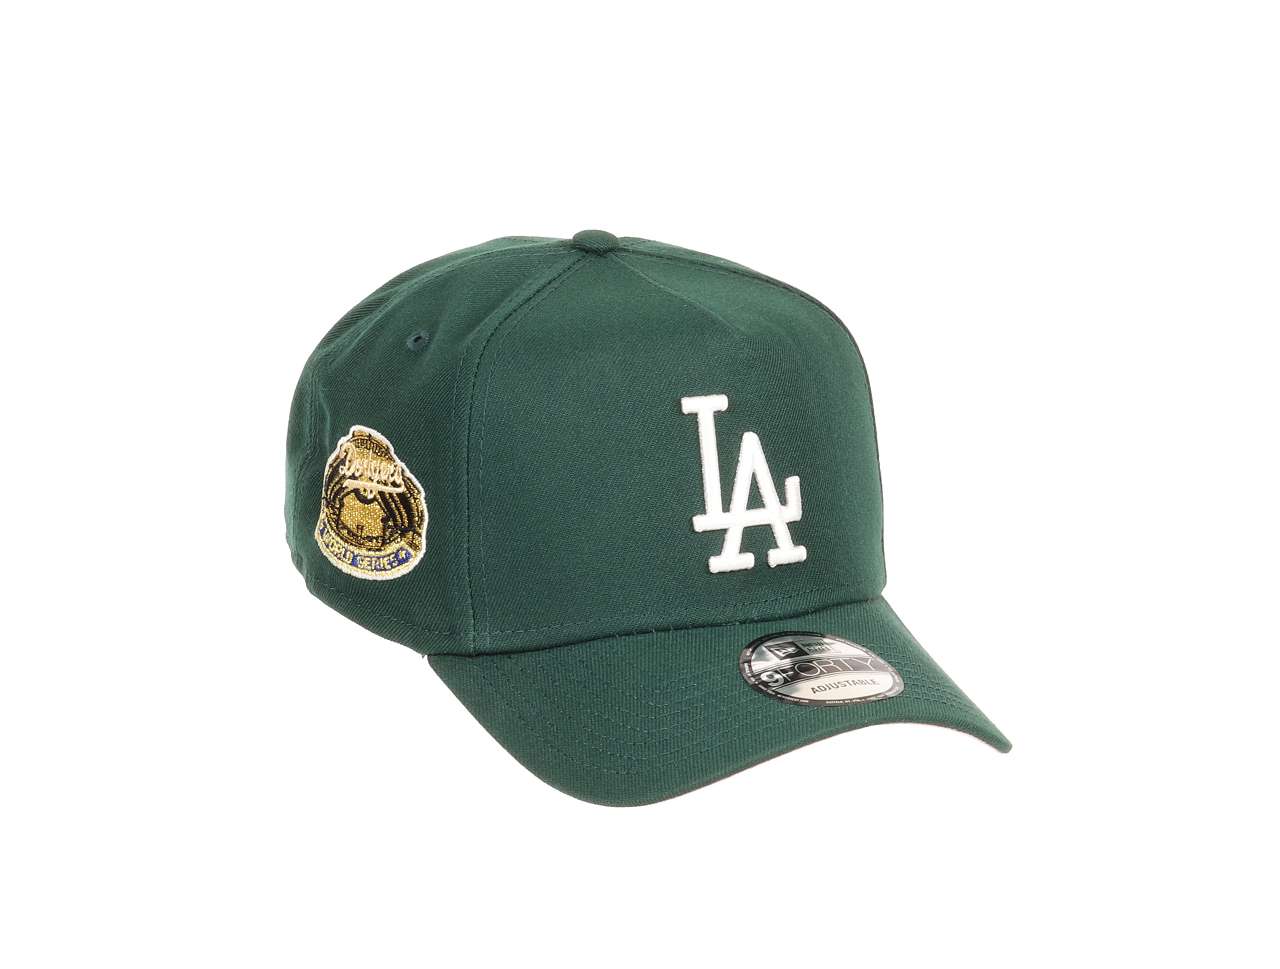 Los Angeles Dodgers MLB World Series Sidepatch Dark Green 9Forty A-Frame Adjustable Cap New Era